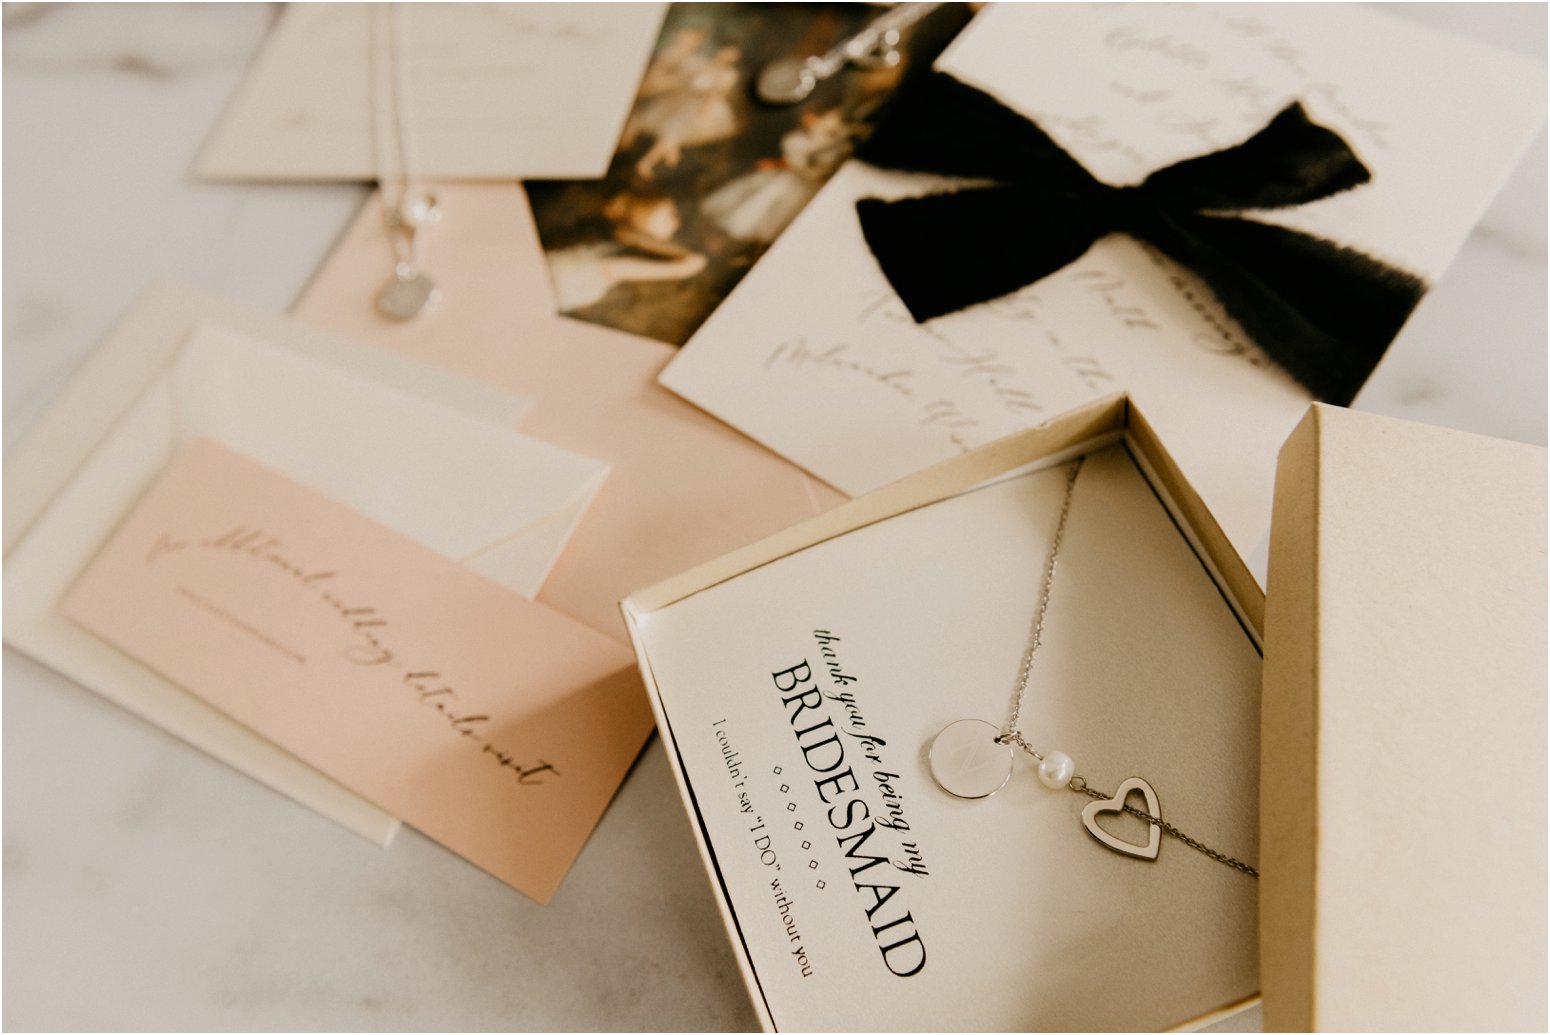 best bridesmaid gifts